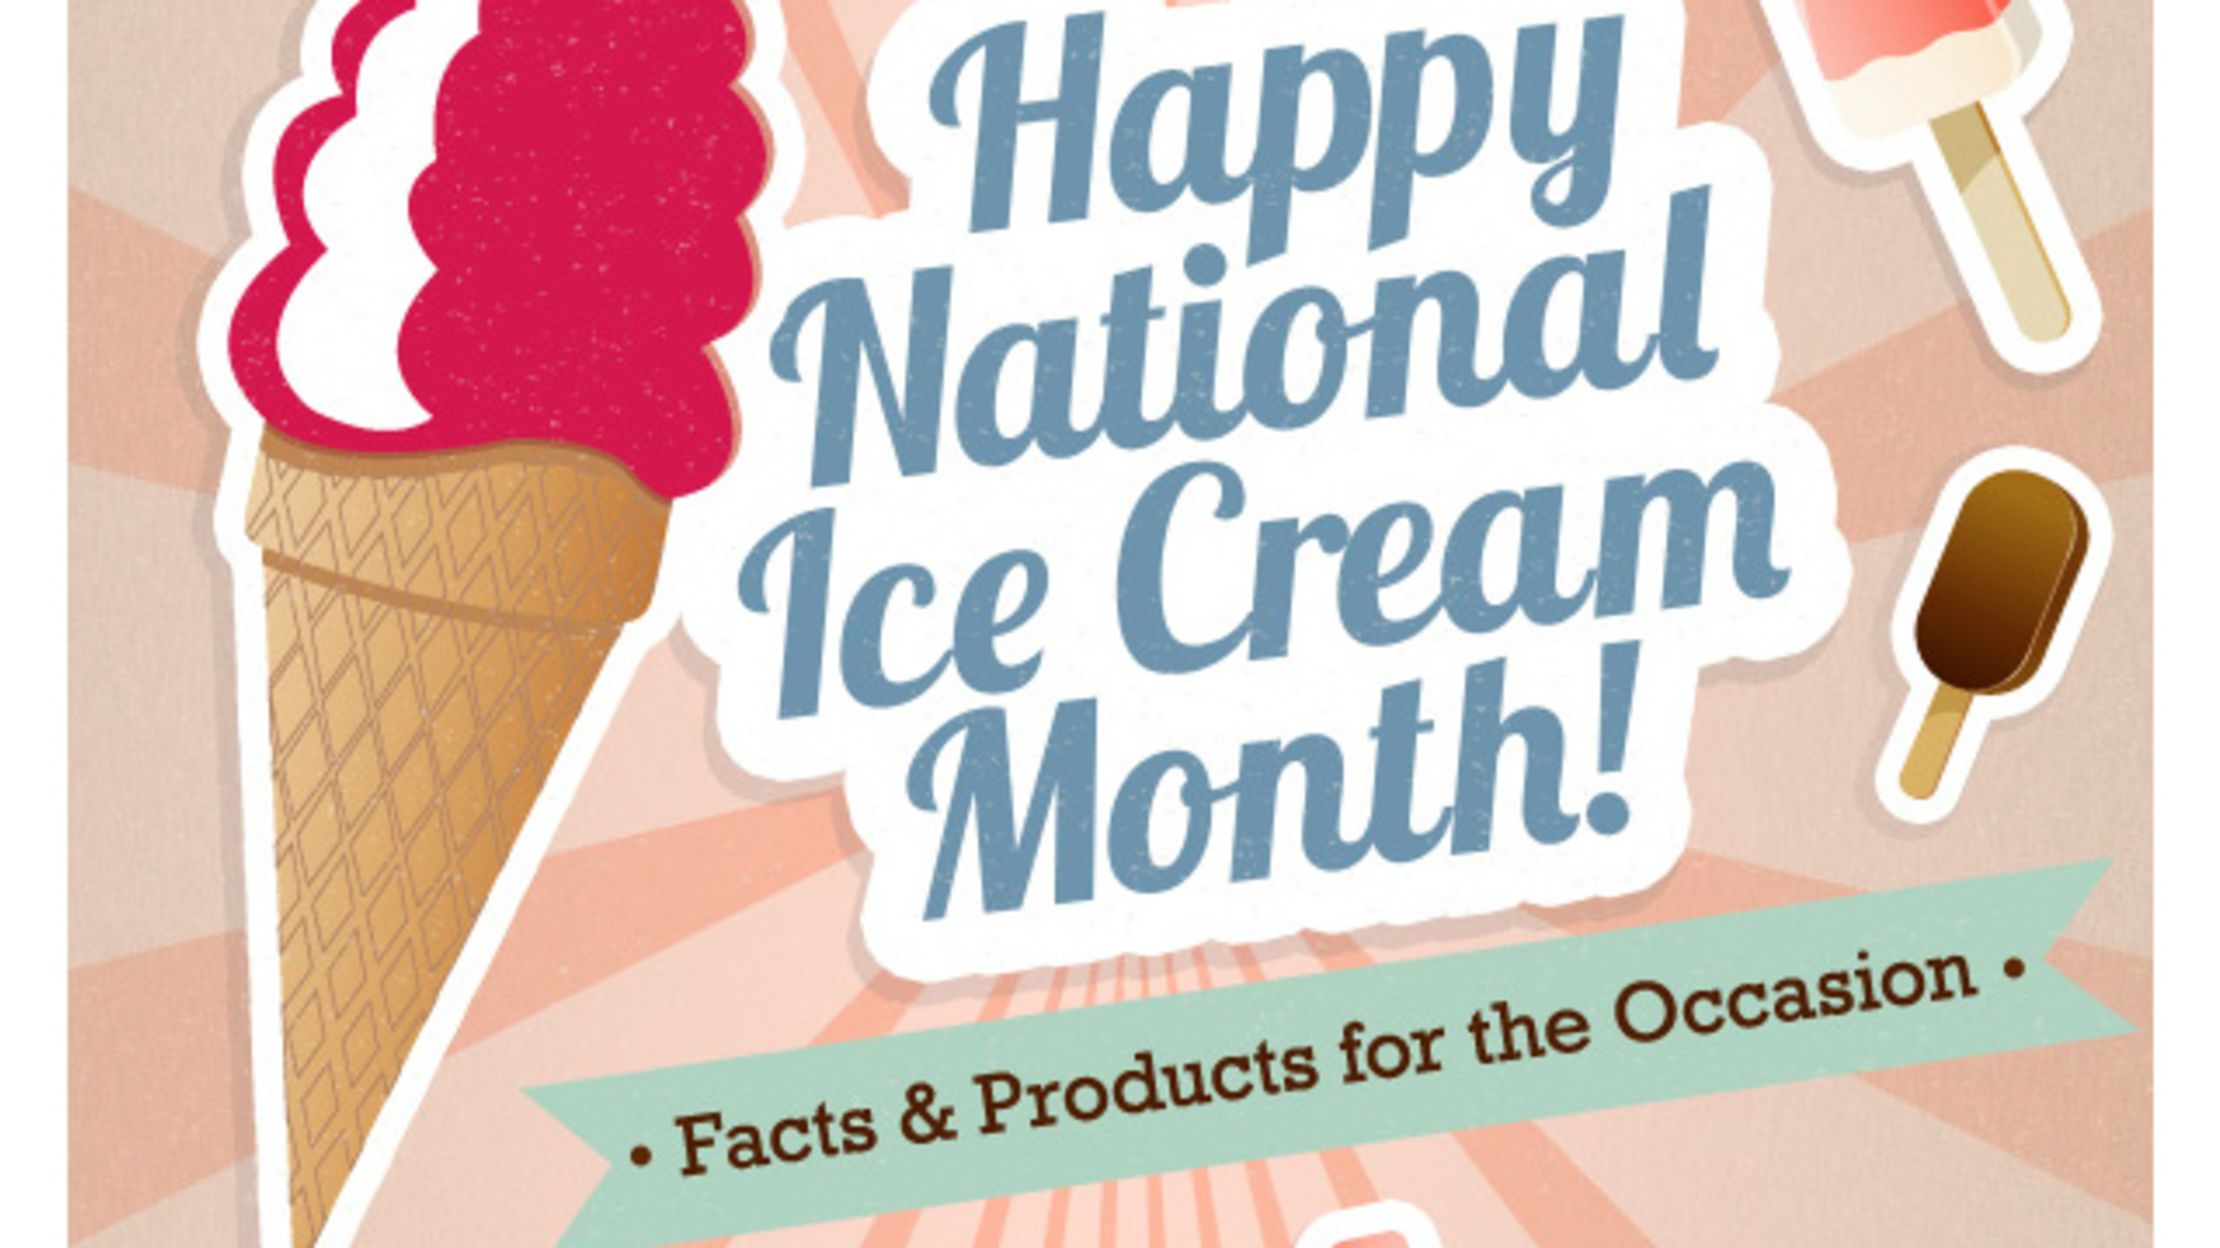 Fun Facts and Cool Products for National Ice Cream Month! Mental Floss